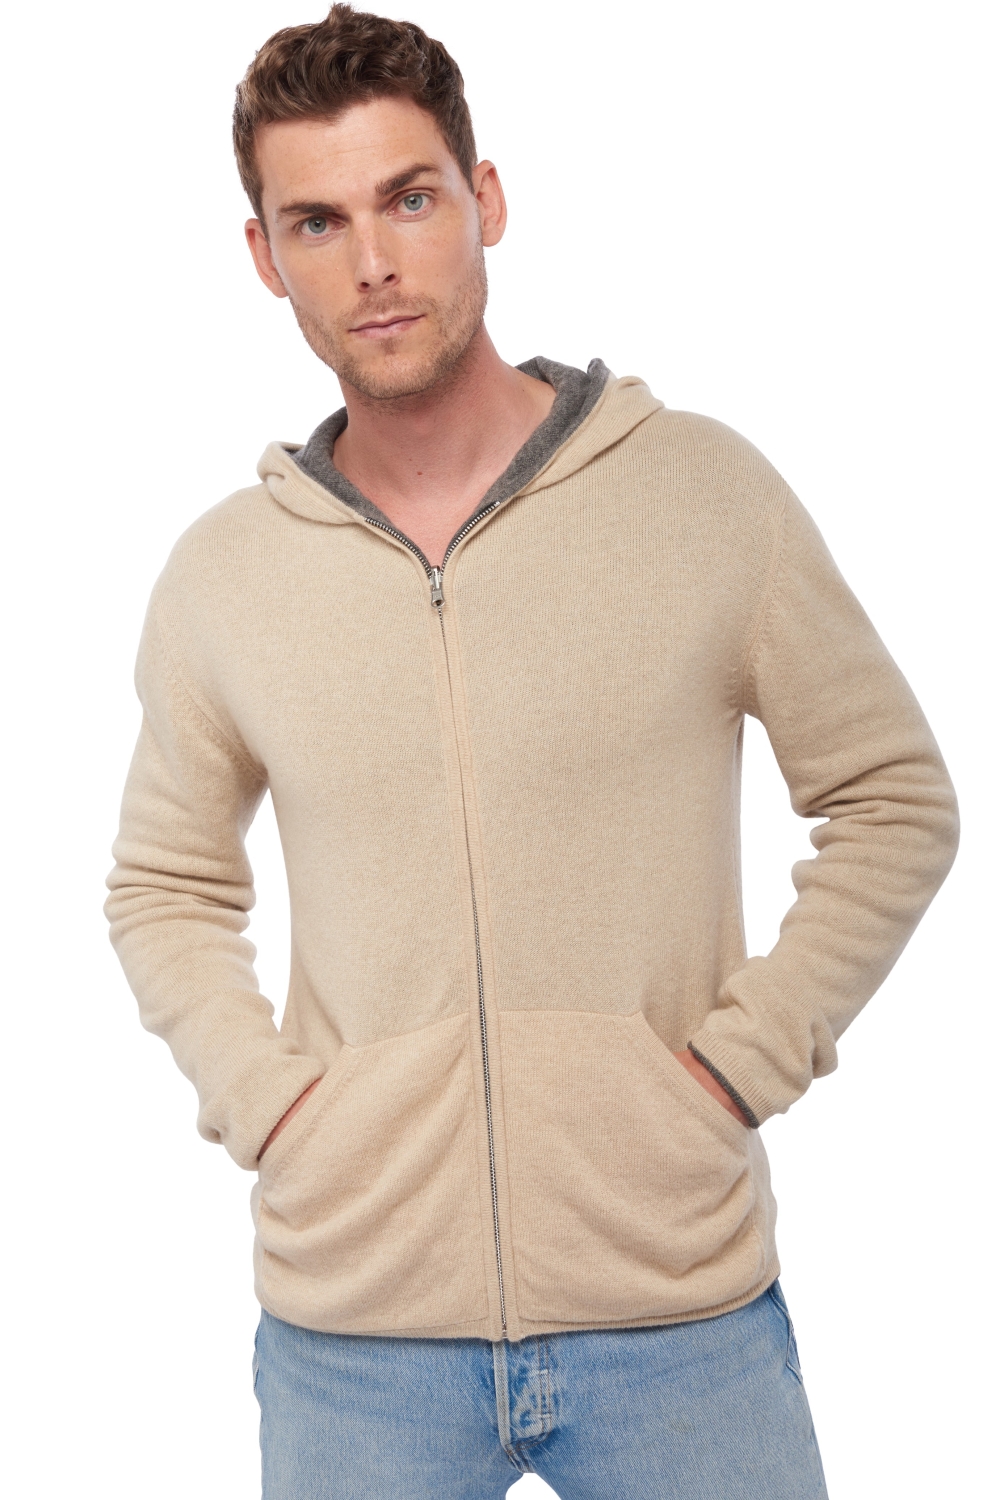 Cachemire pull homme carson marmotte chine natural beige s